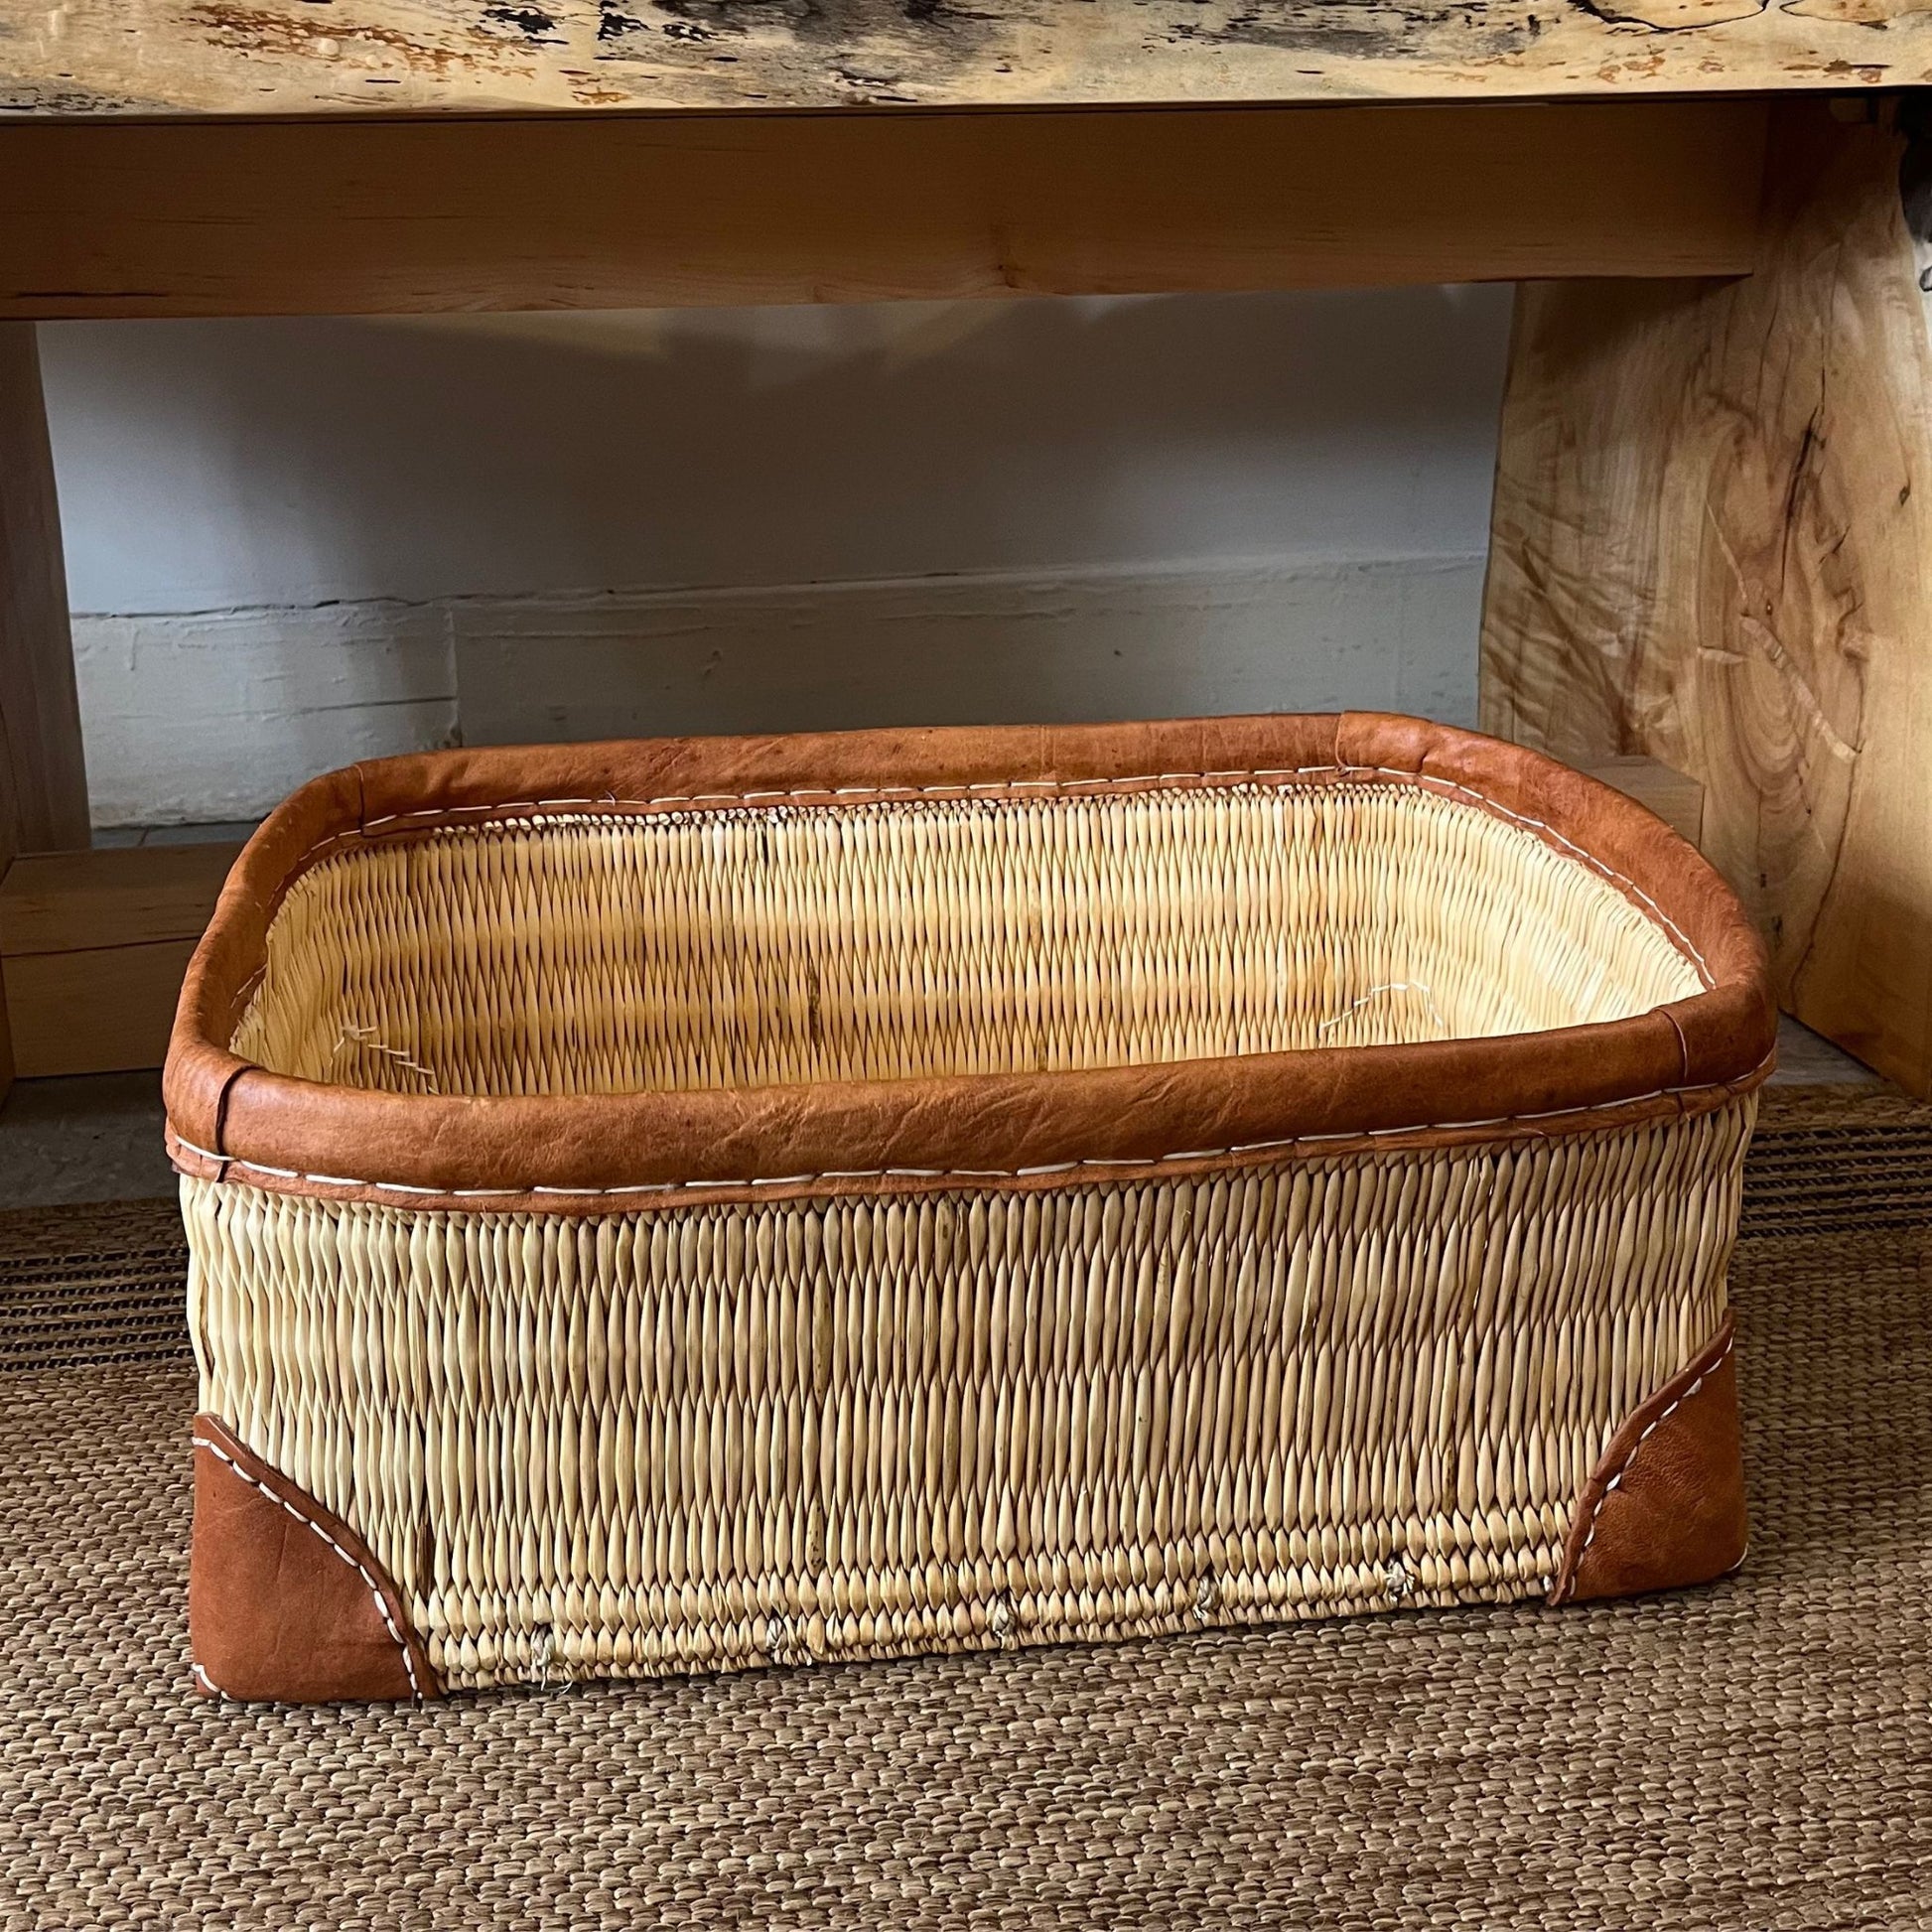 Medium woven palm and leather-trimmed rectangular storage basket